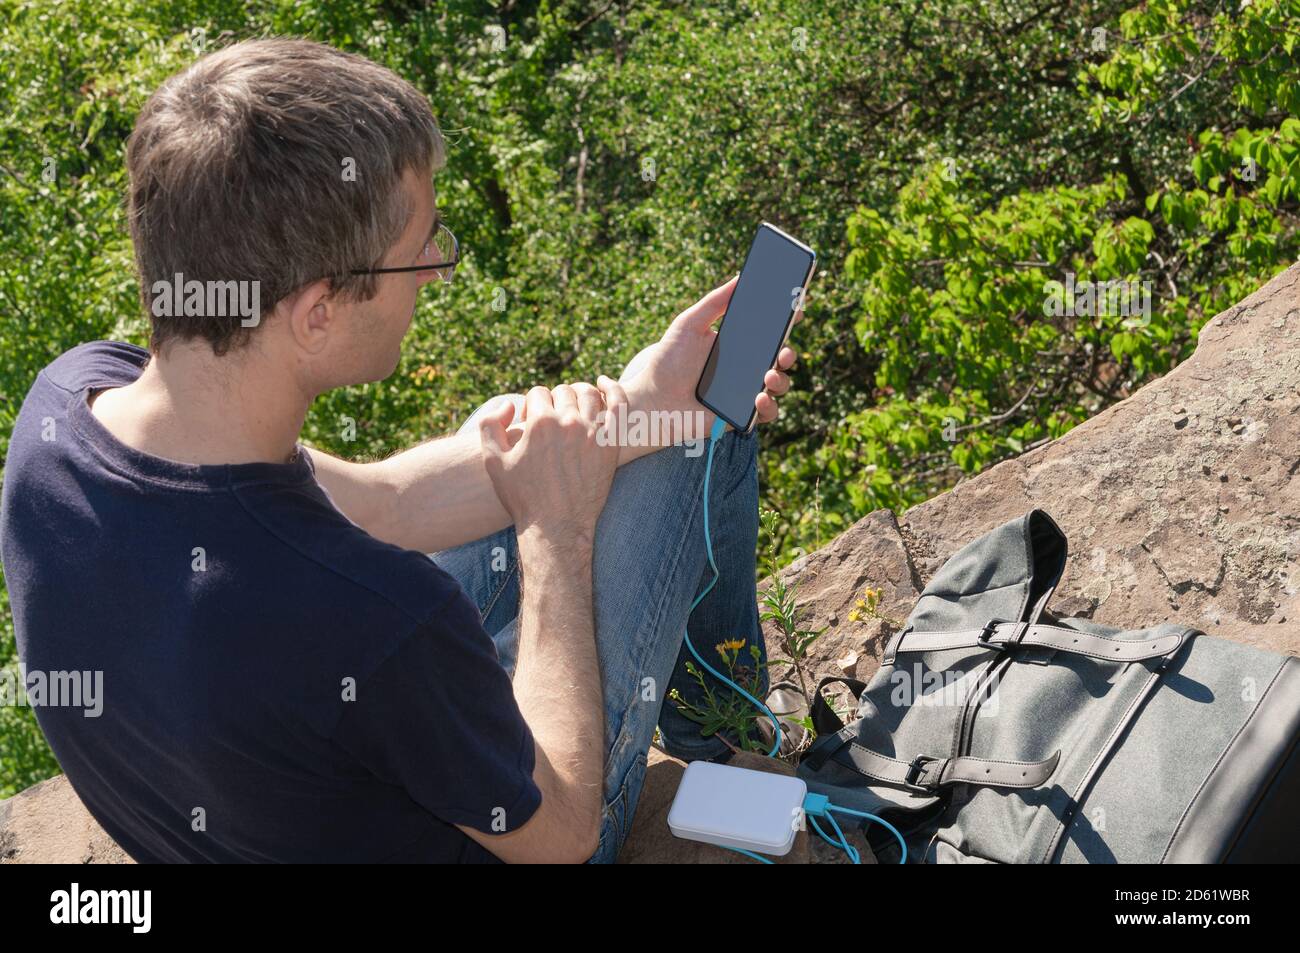 Man on a hike uses smartphone while charging from the power bank sitting on the rock over the forest. Stock Photo